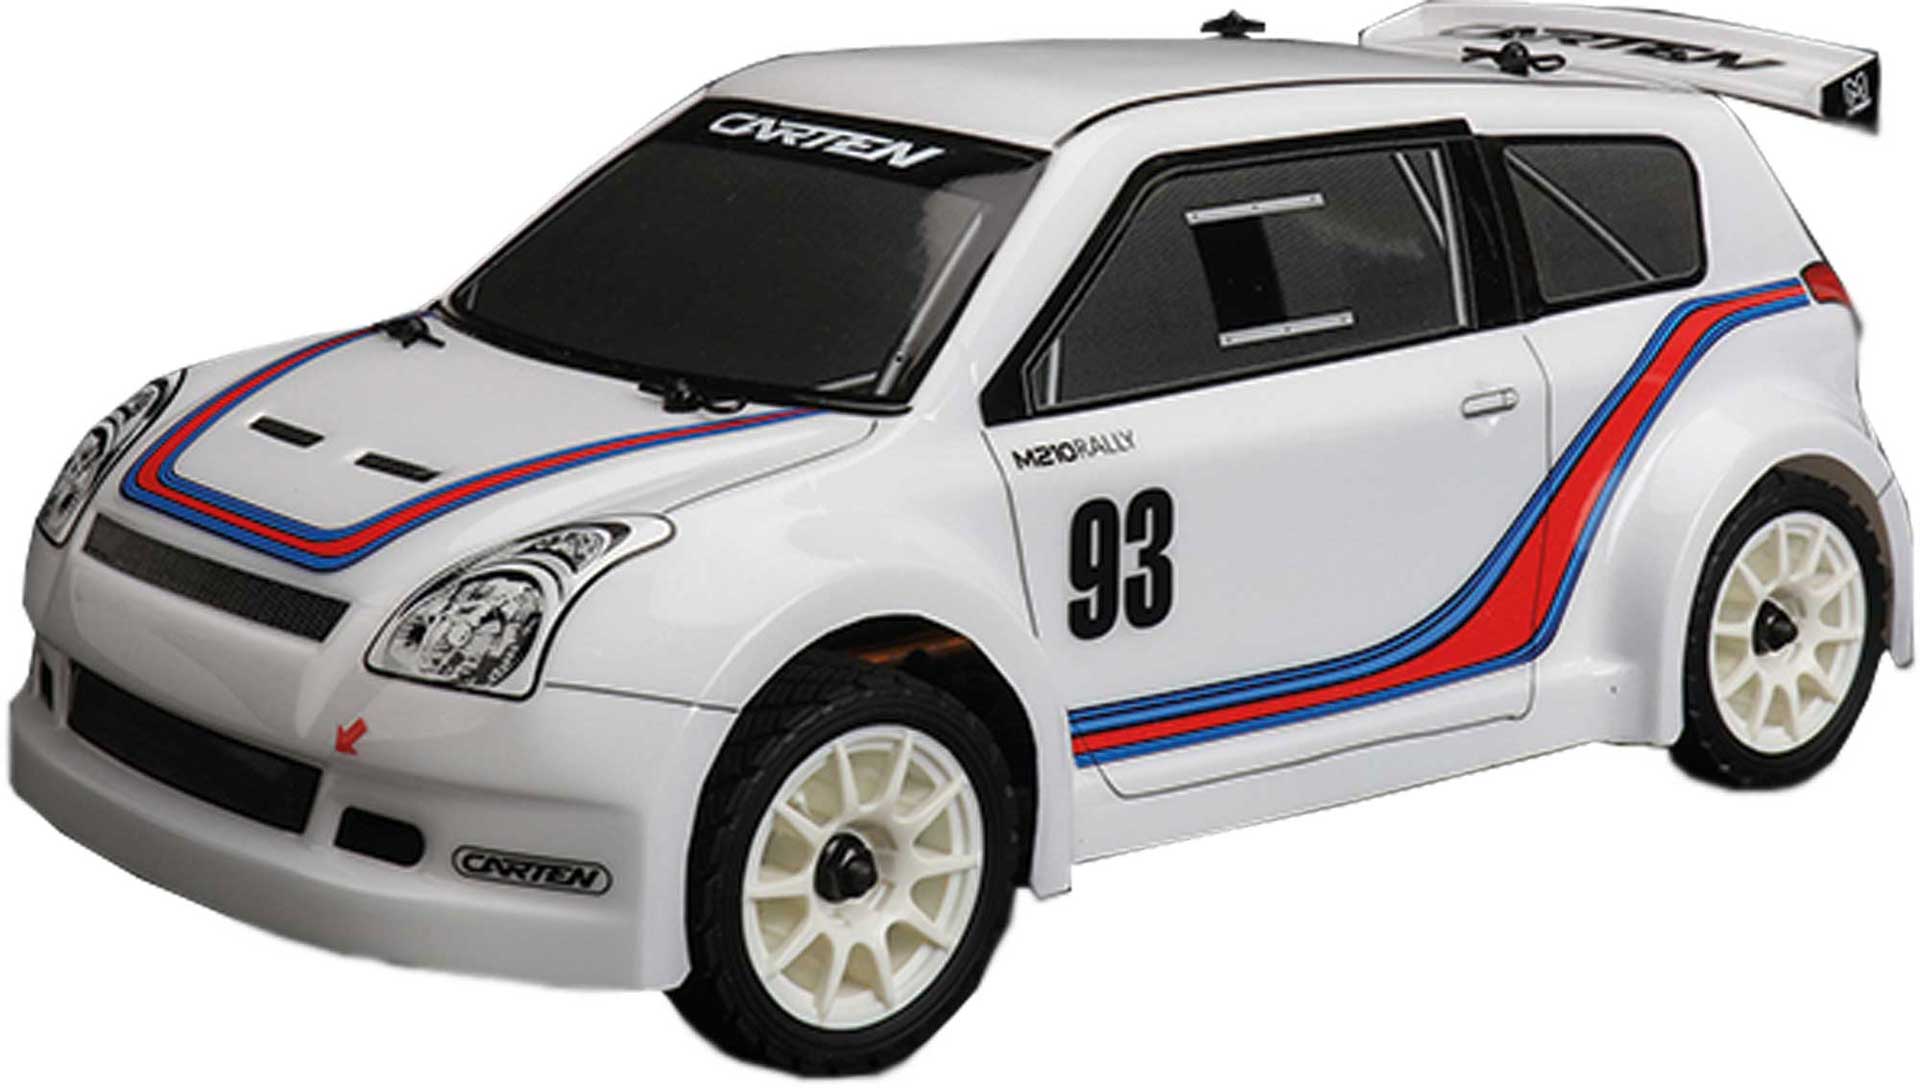 CARTEN M210 RALLY 1/10 M-Chassis RTR 2,4GHz EP